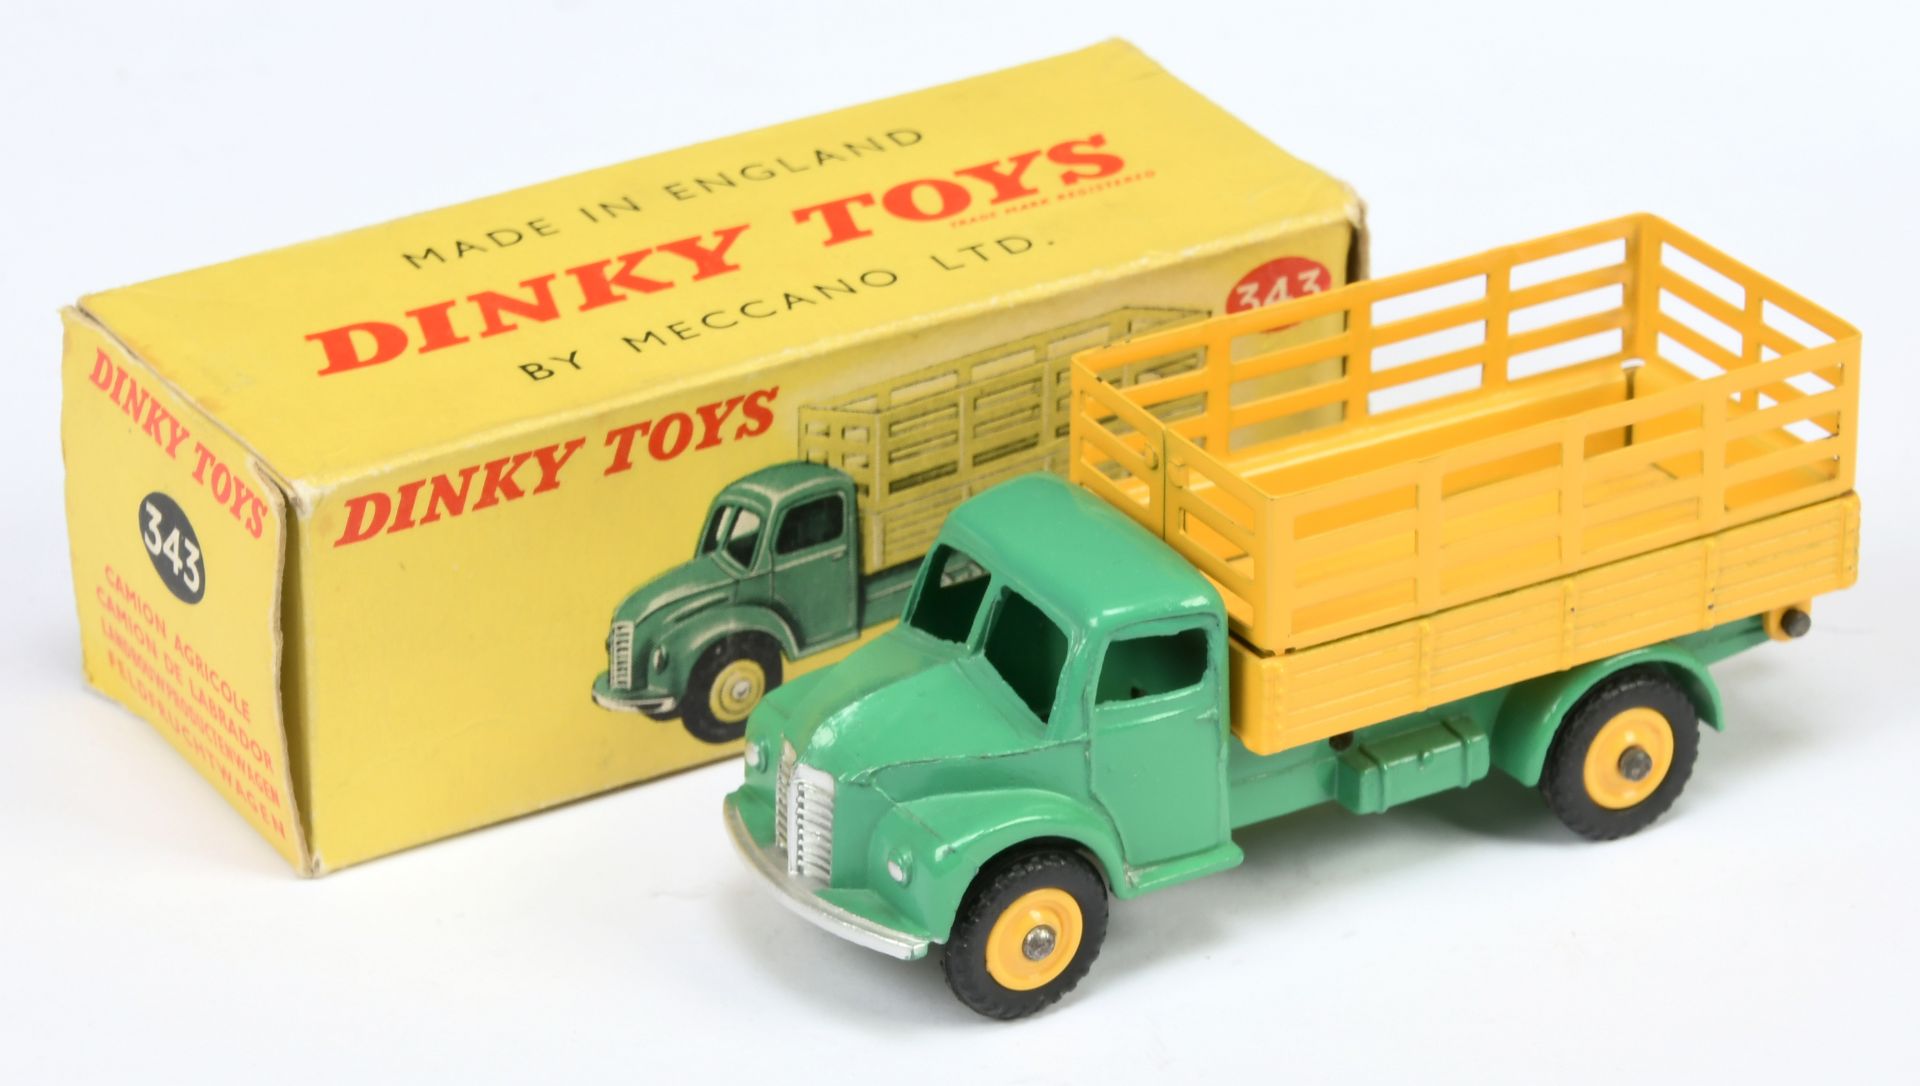 Dinky Toys 343 Dodge Produce Wagon - Mid-green cab and chassis, yellow stake back and plastic hub...